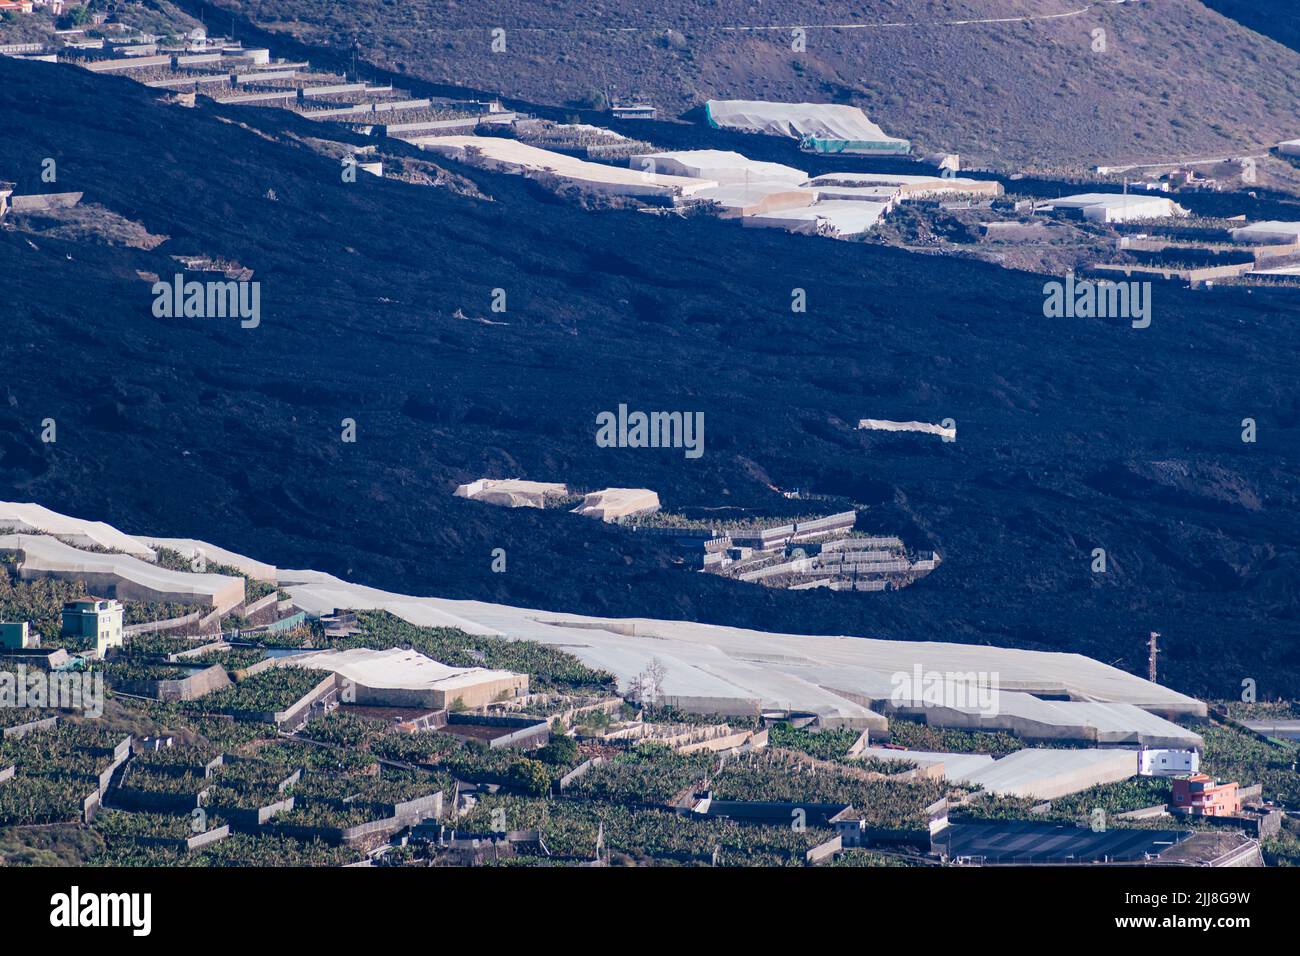 Destruction caused by the lava river in the Aridane Valley. La Palma, Canary Islands, Spain Stock Photo